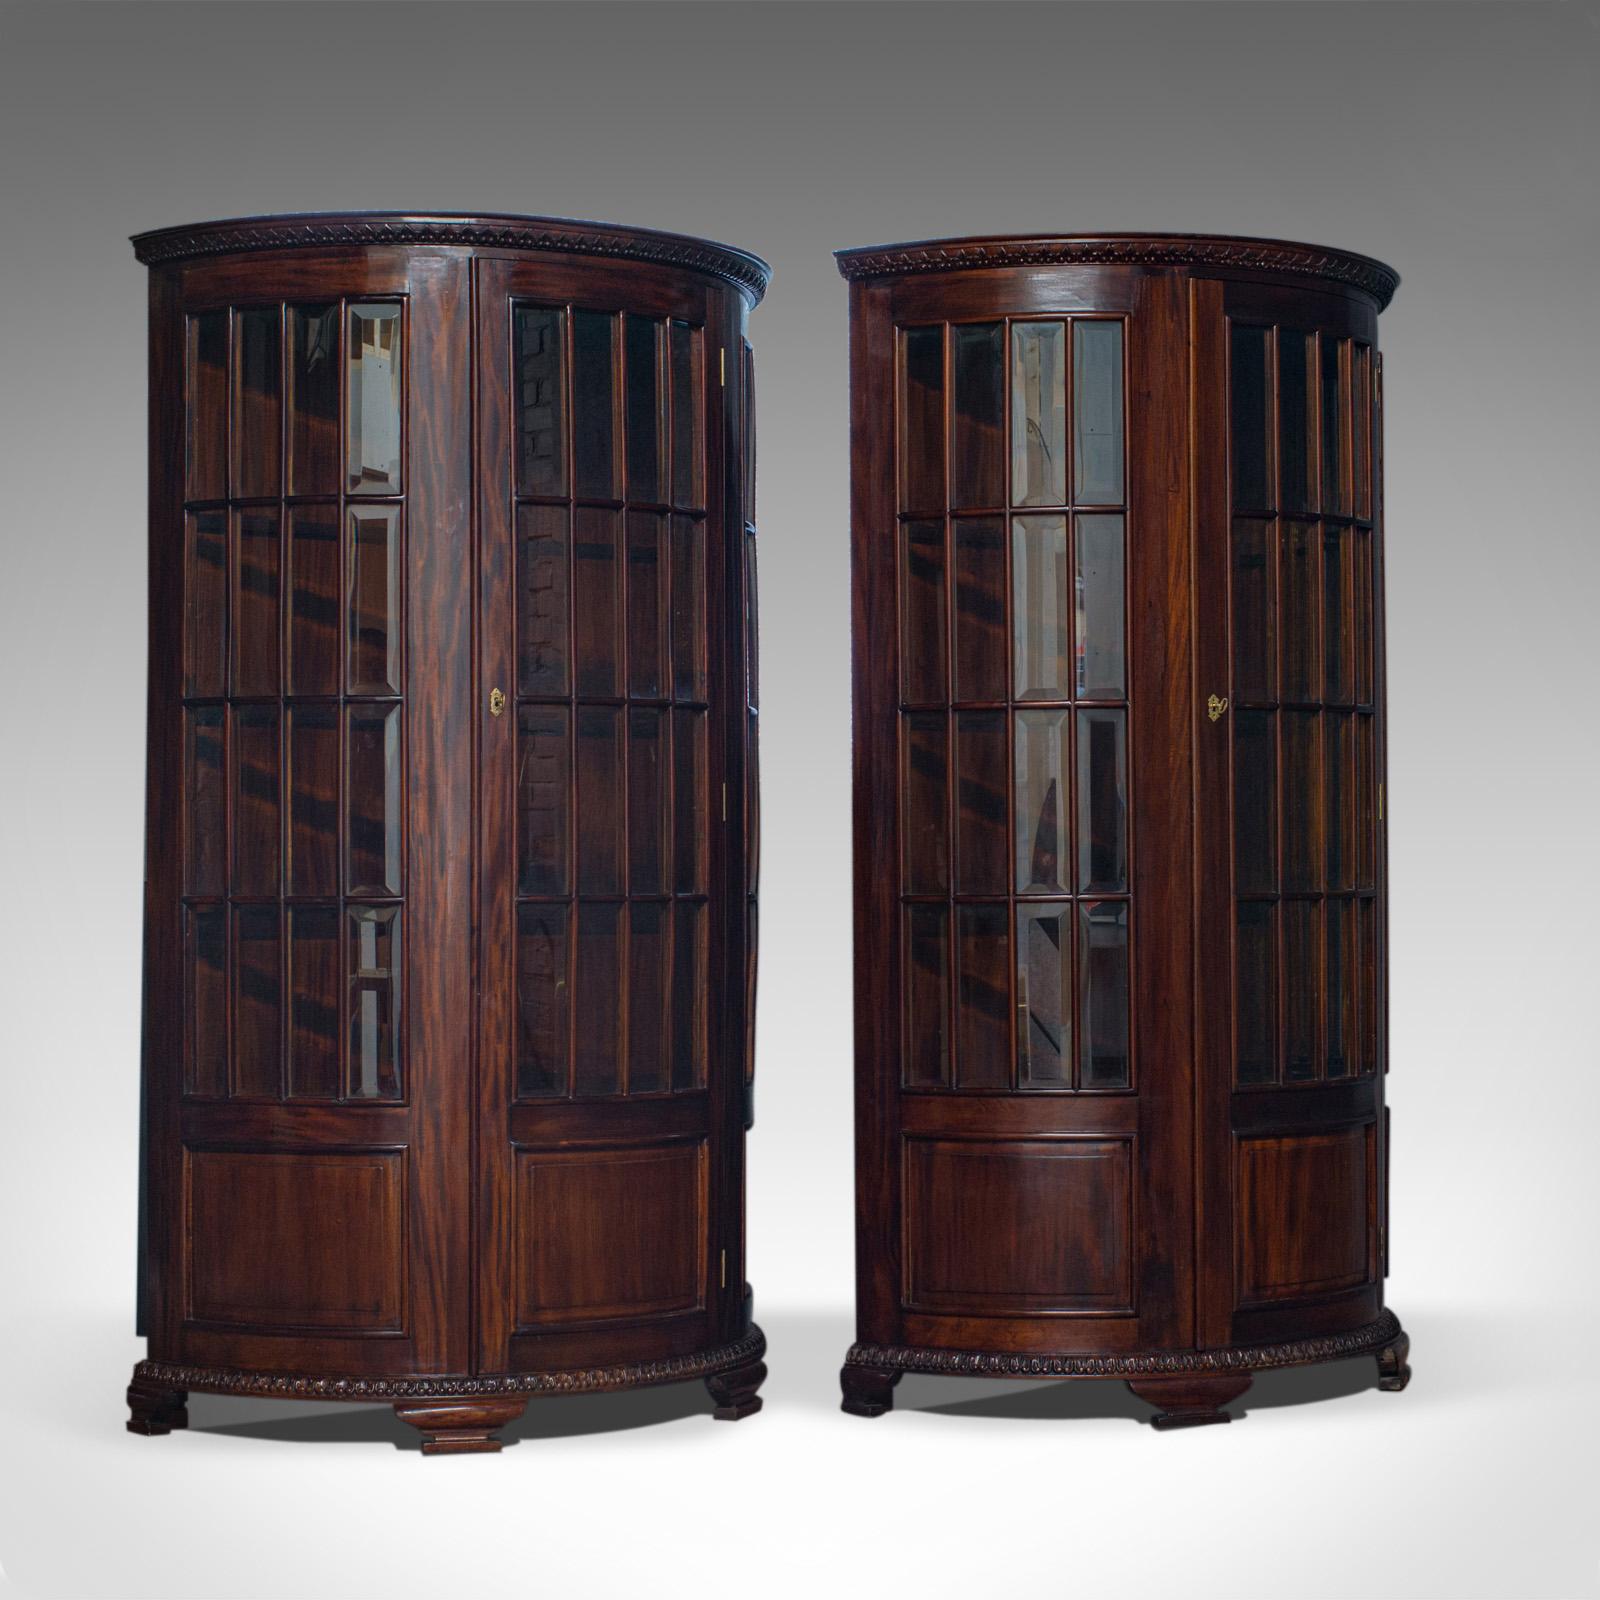 This is a vintage pair of demilune display cabinets. Two continental, mahogany, bow-fronted, glazed display cabinets dating to the late 20th century.

Impressive demilune fronted cabinets
Deep russet tones to the select mahogany
Grain interest